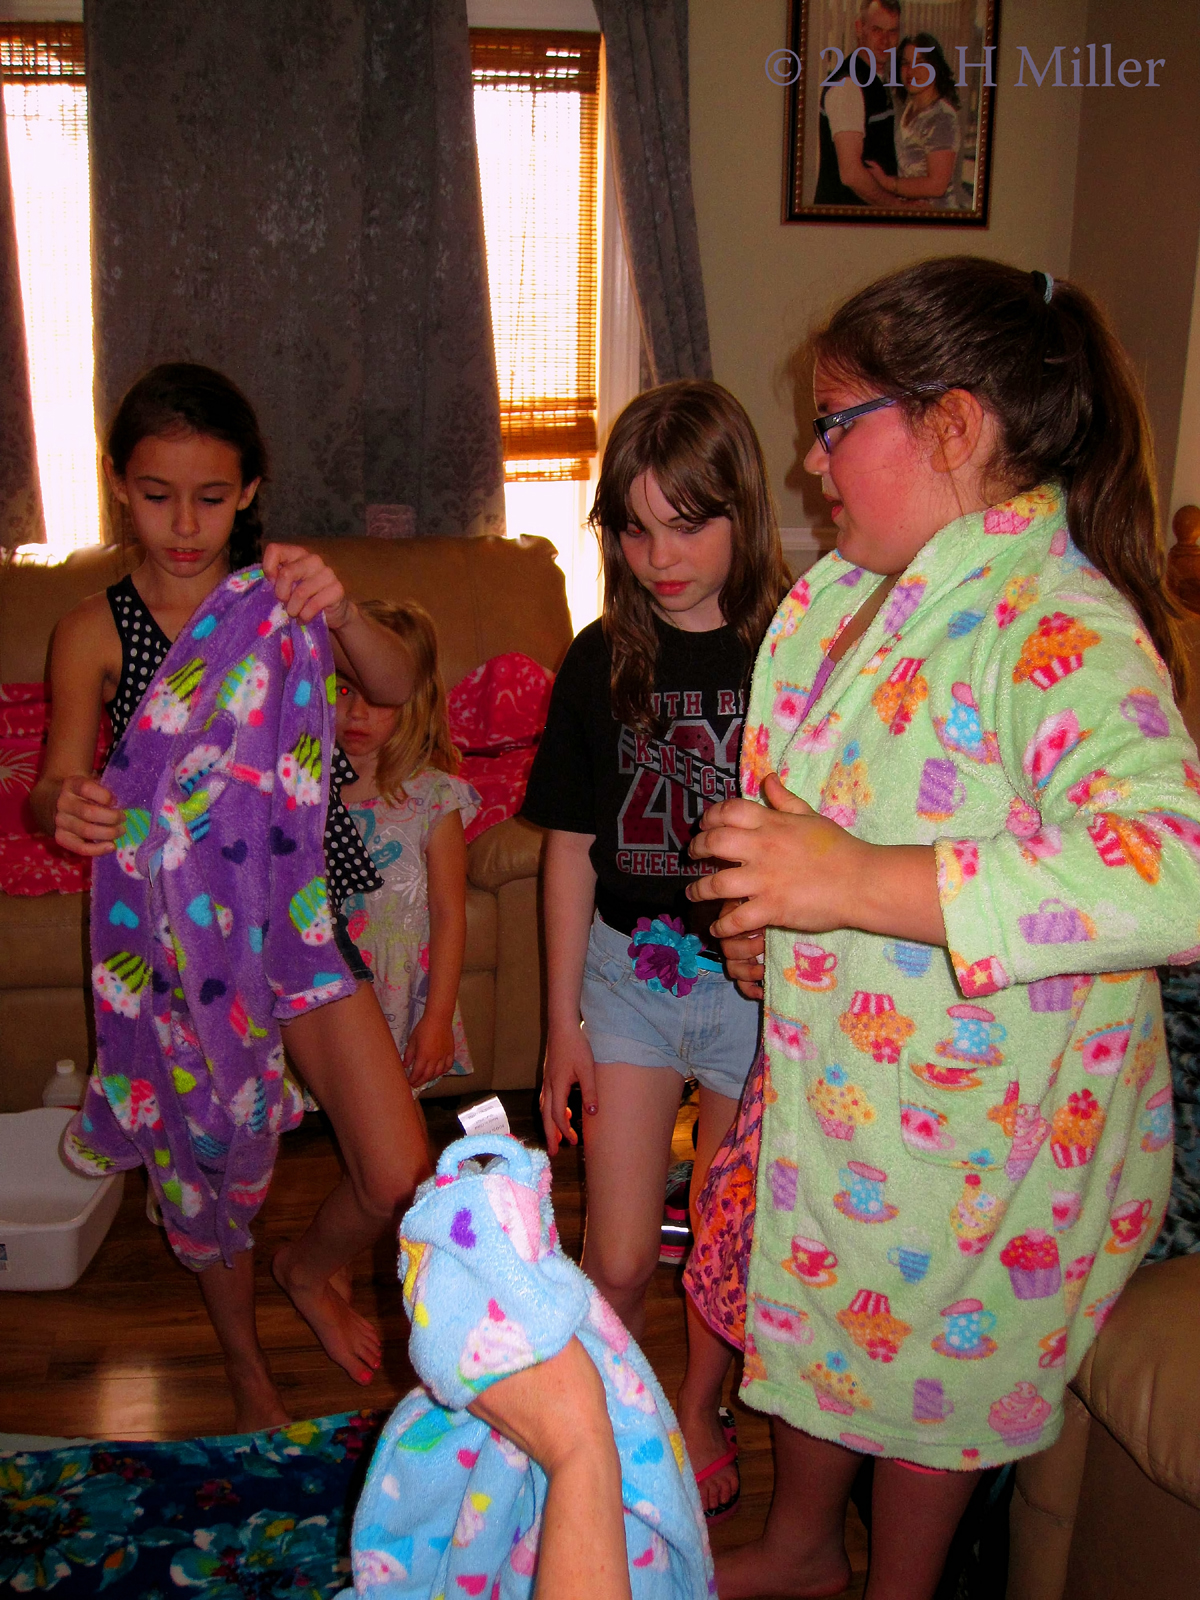 Cool Robes! The Girls Find Colors And Patterns They Like. 